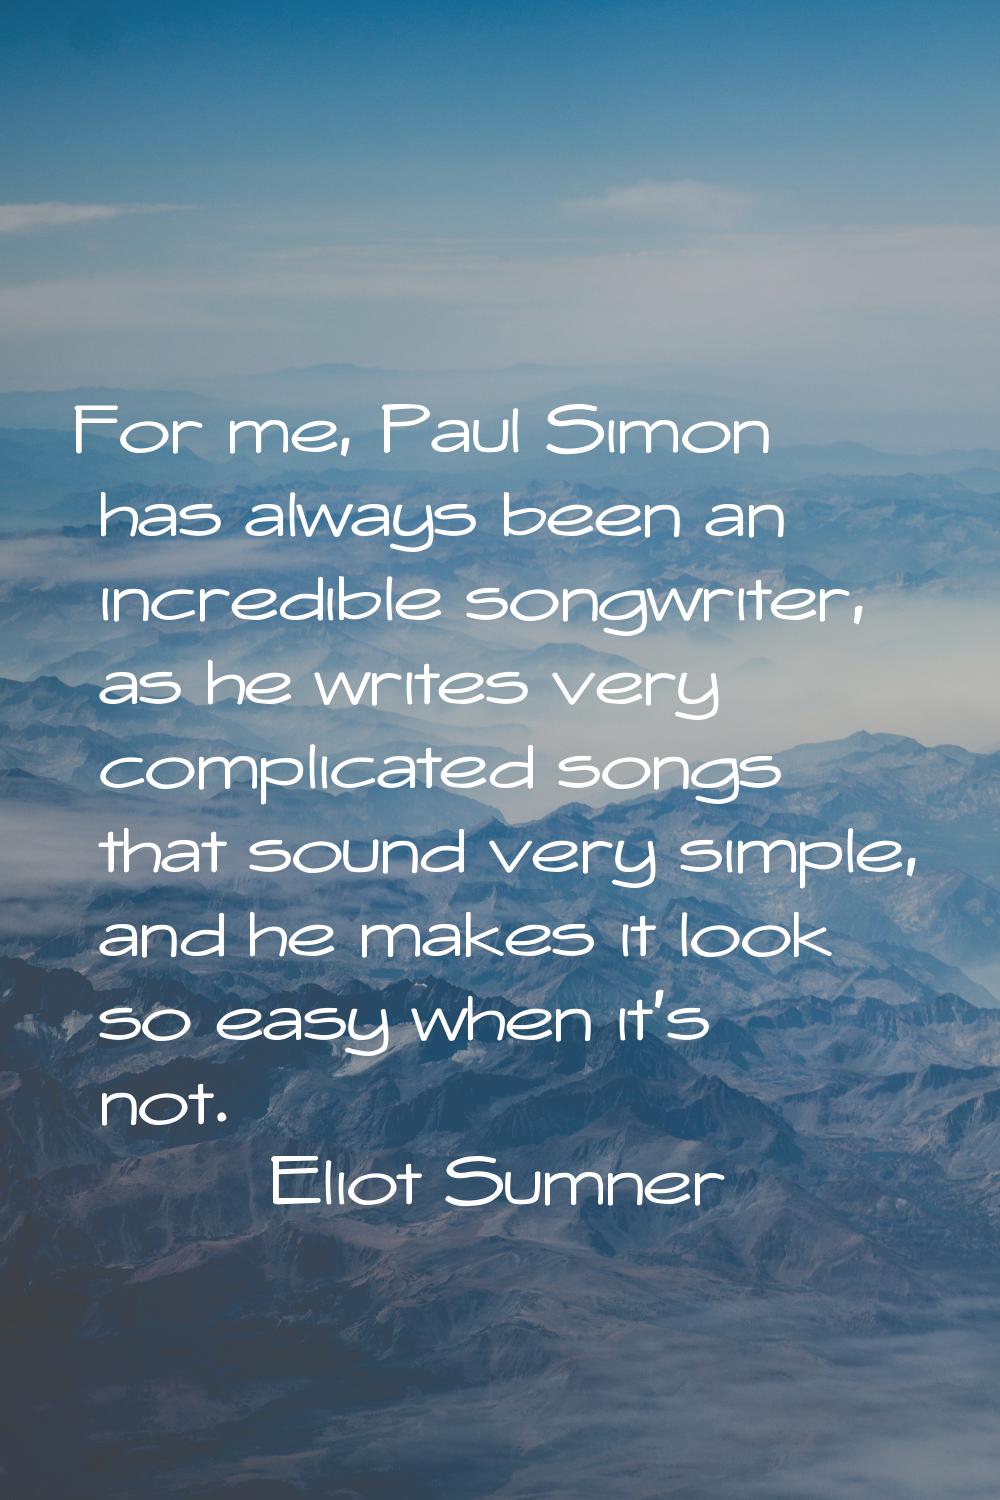 For me, Paul Simon has always been an incredible songwriter, as he writes very complicated songs th